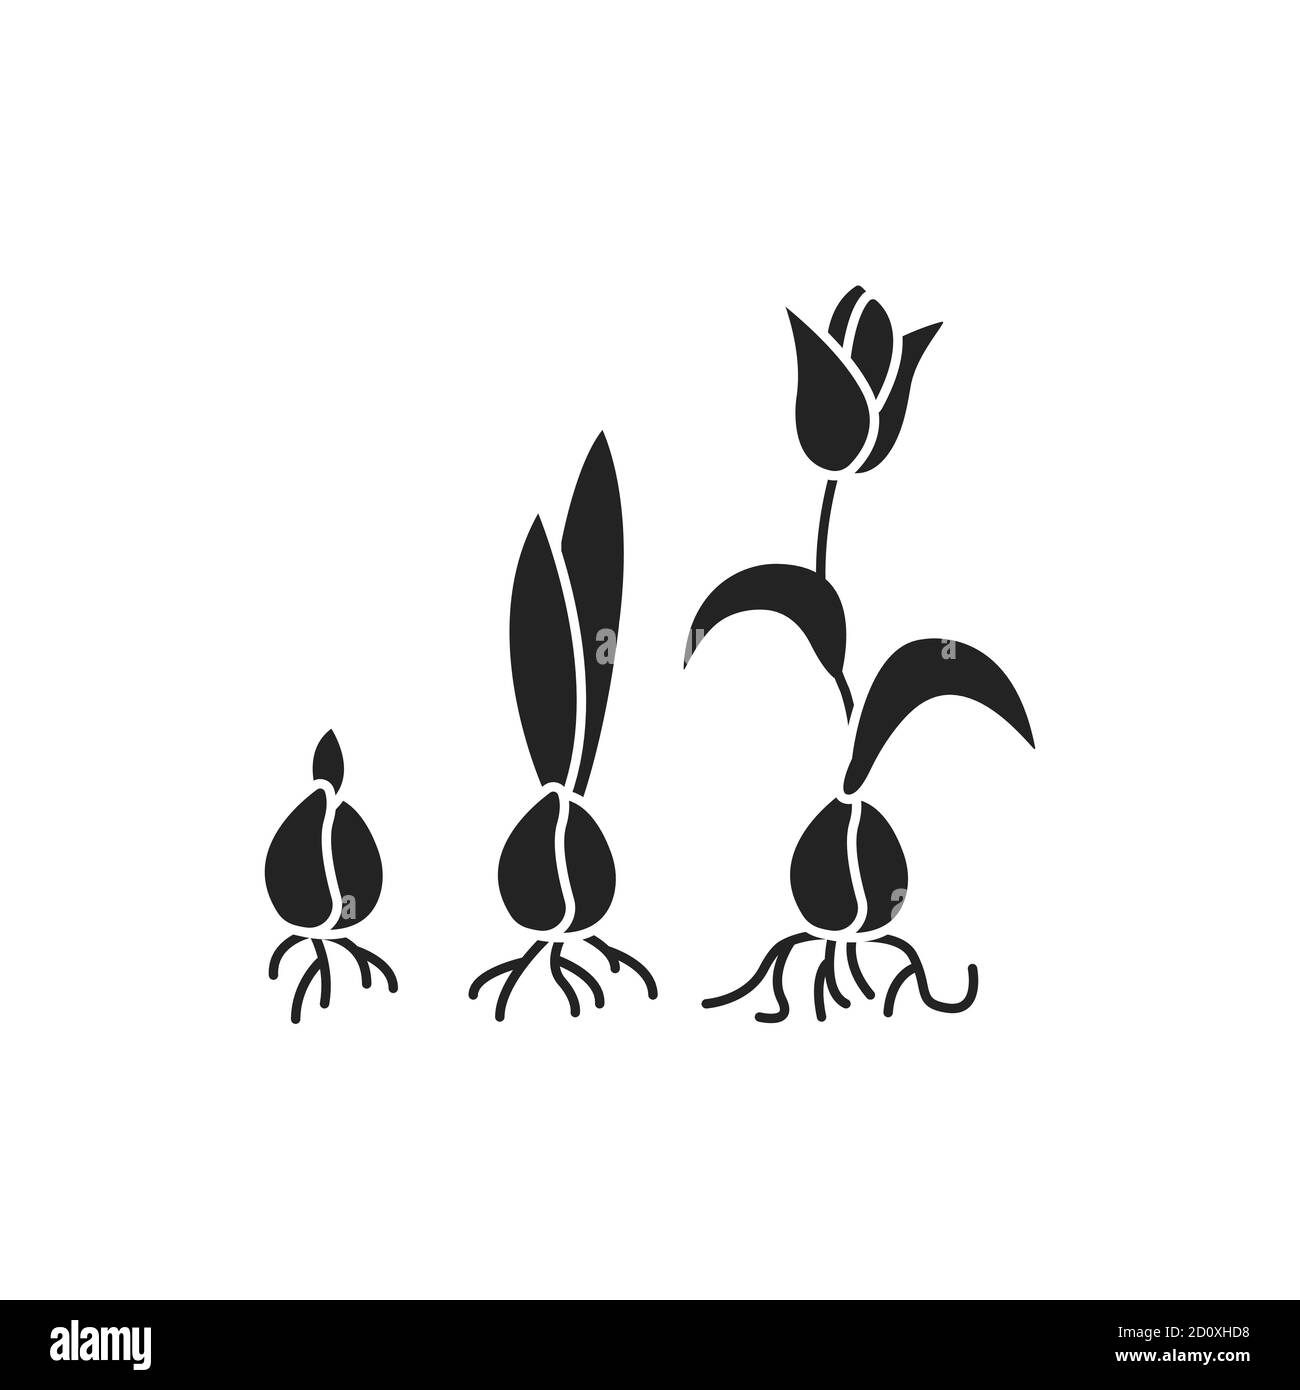 Growing plant stages black glyph icon. The seed, germination, growth, reproduction, pollination, and seed spreading. Pictogram for web page, mobile Stock Vector